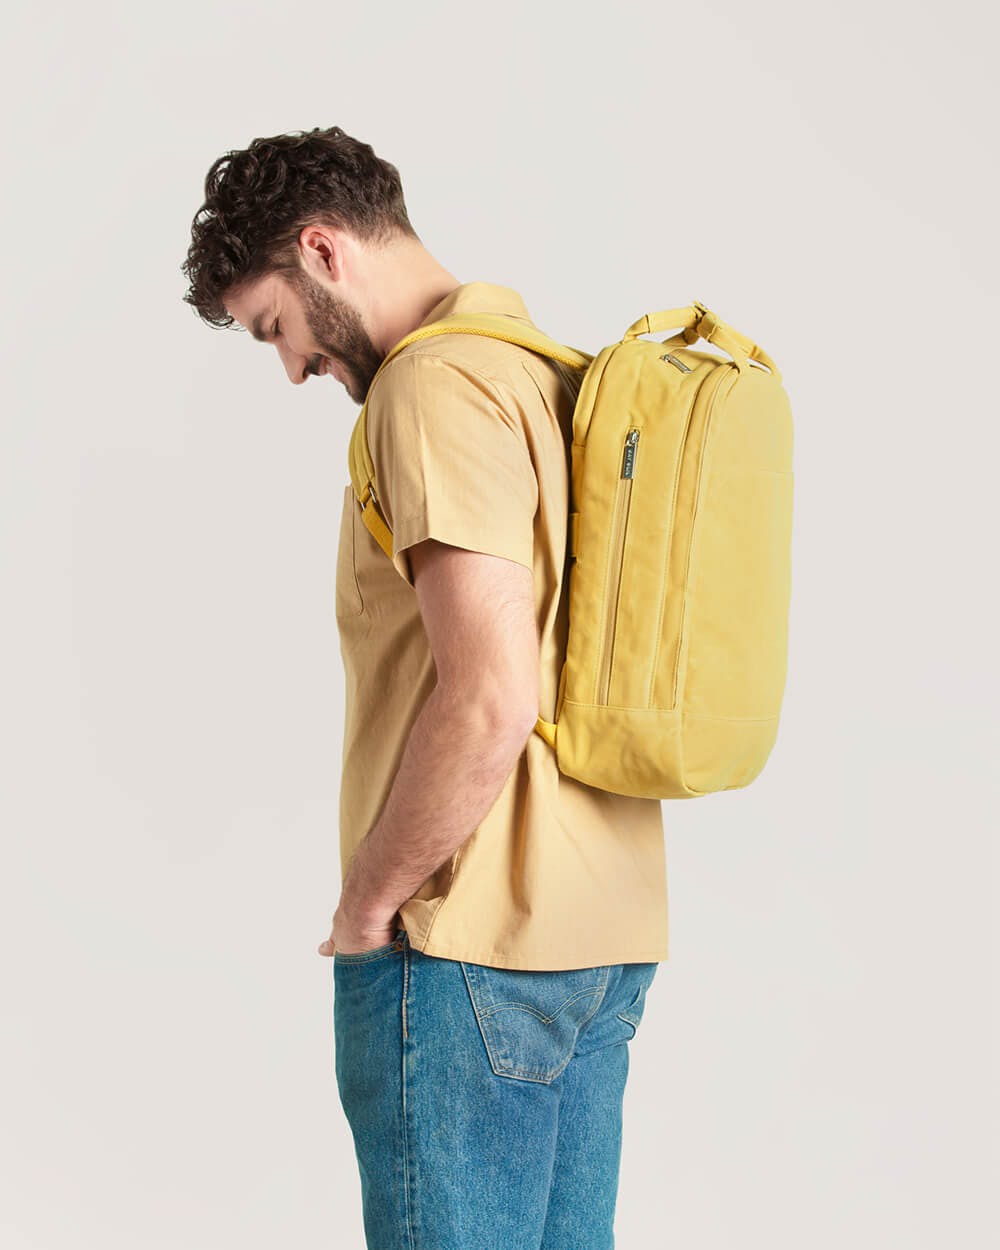 The Backpack - Mustard Yellow